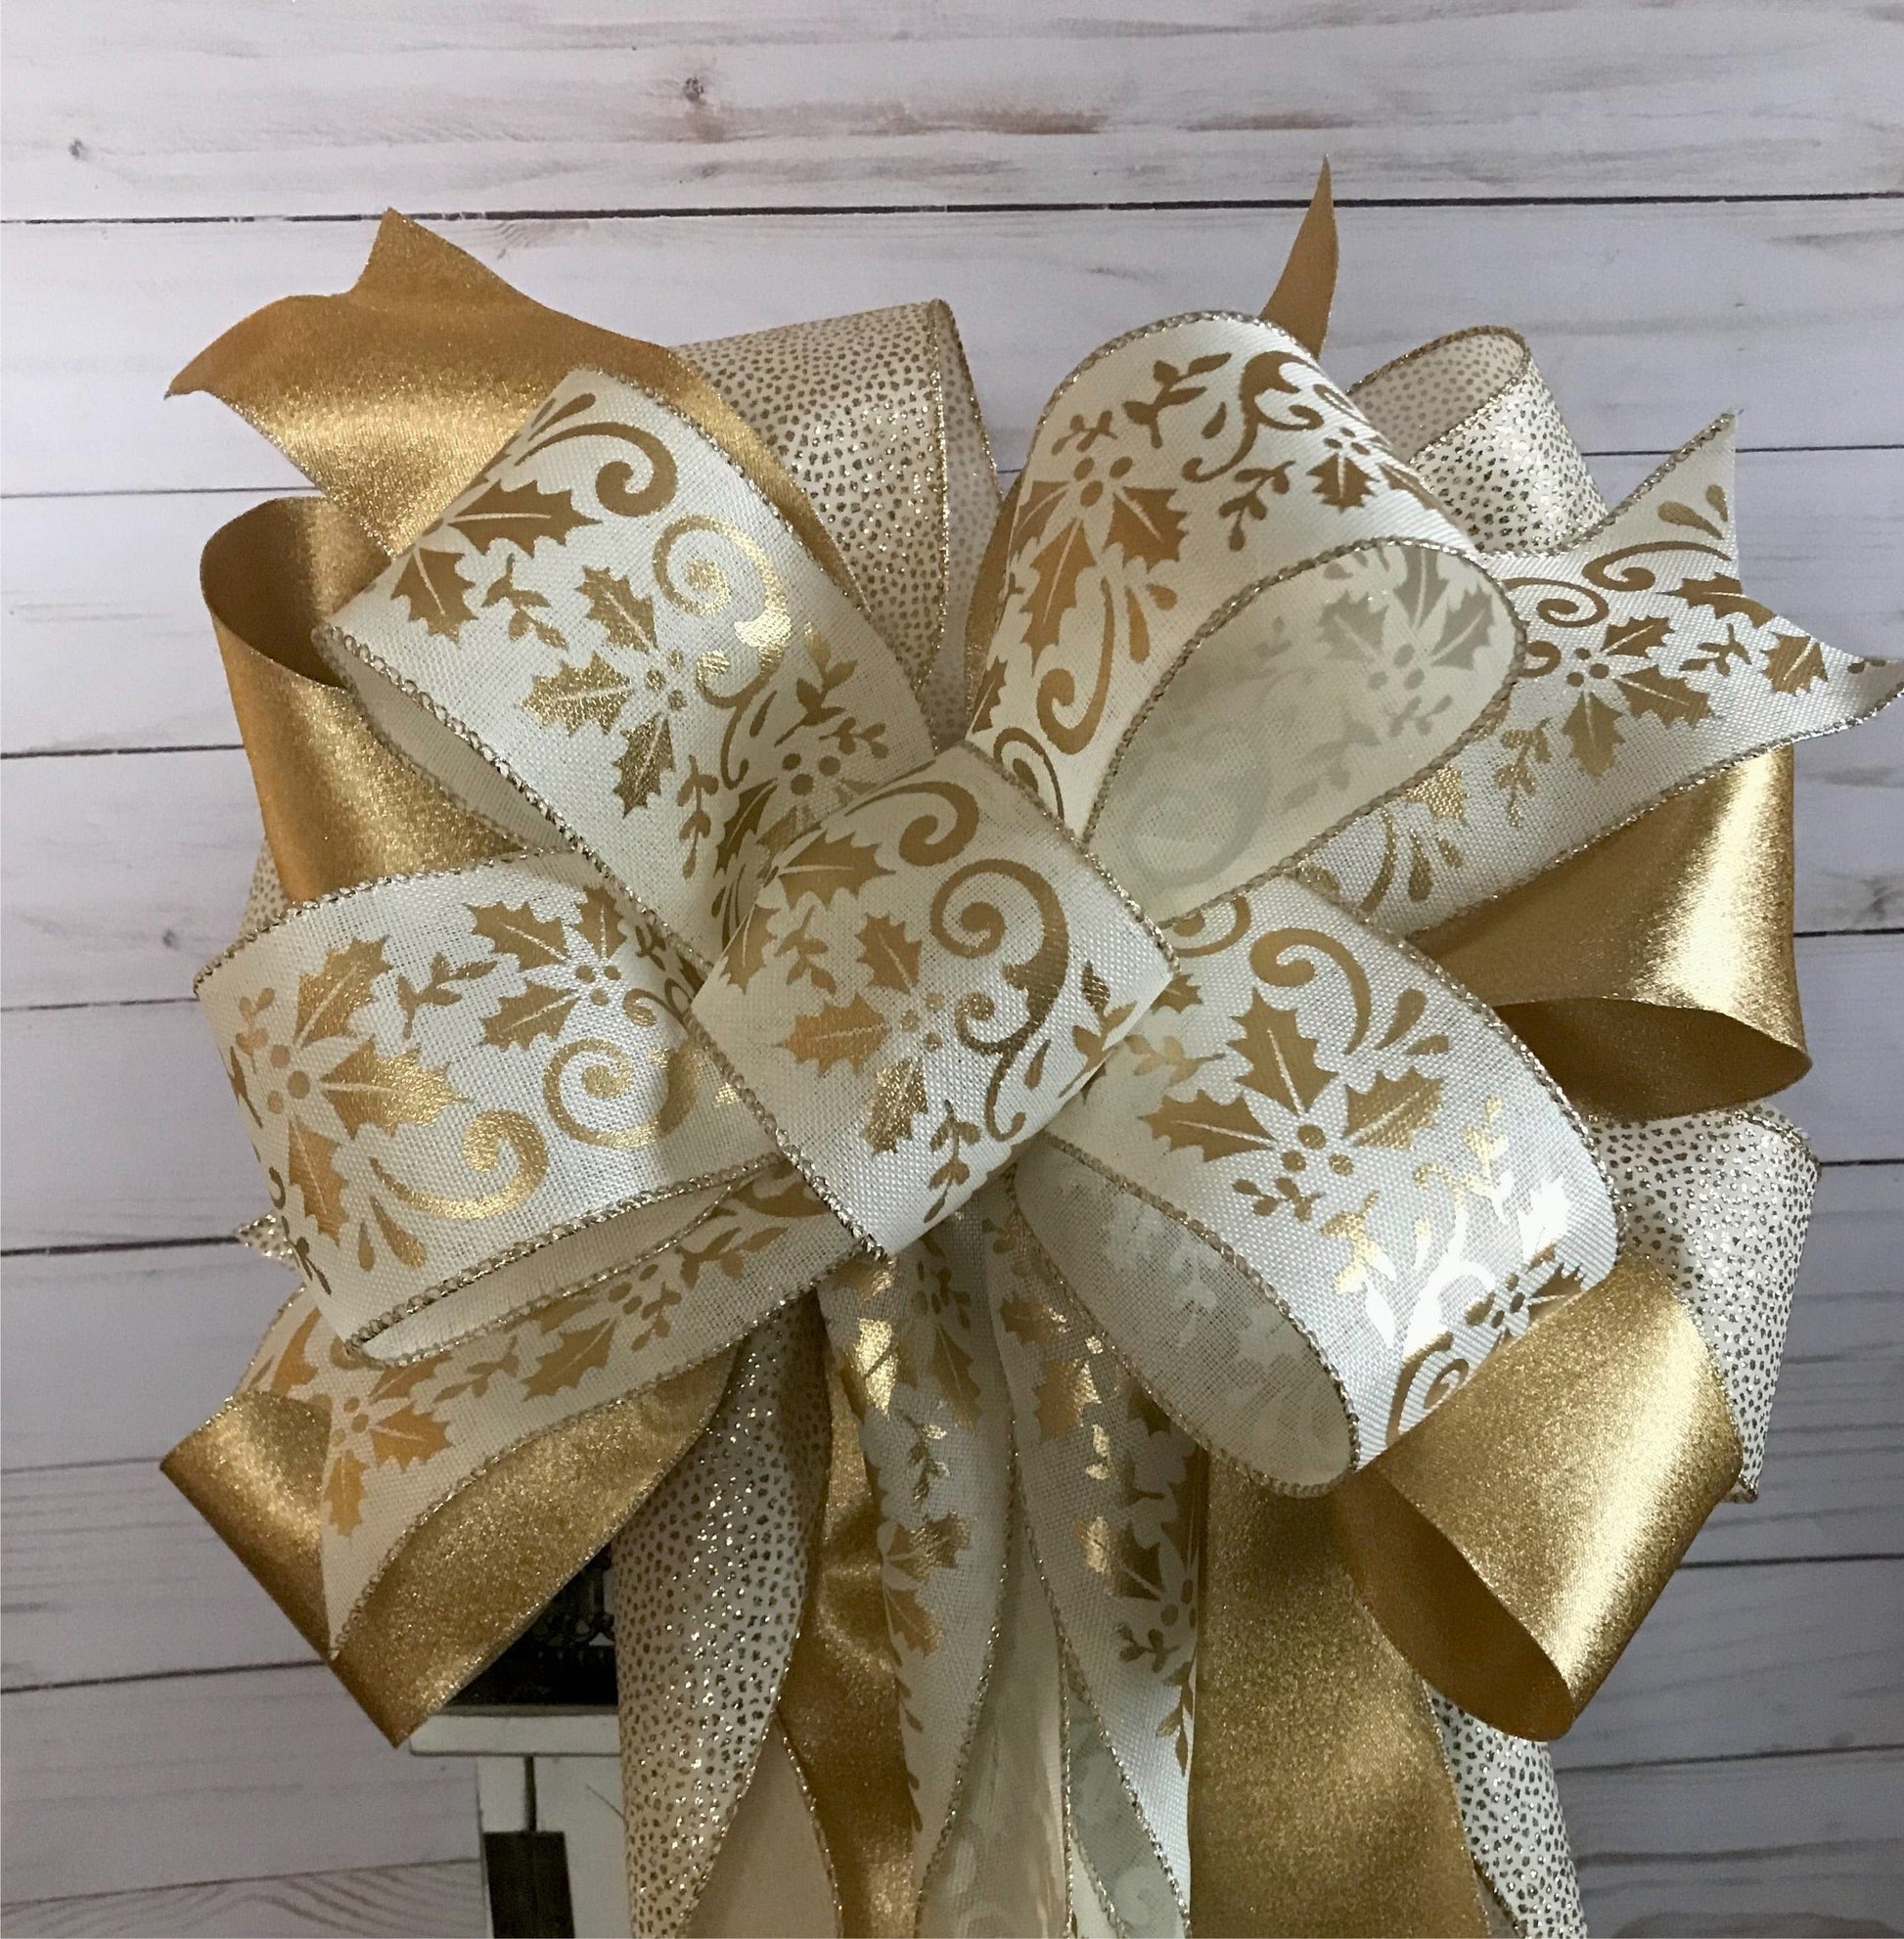 Adriana Ortiz Designs Holiday ornament White and Gold Christmas tree bow topper. Gold Fireplace Mantel Decoration. Gold Wreath bow.